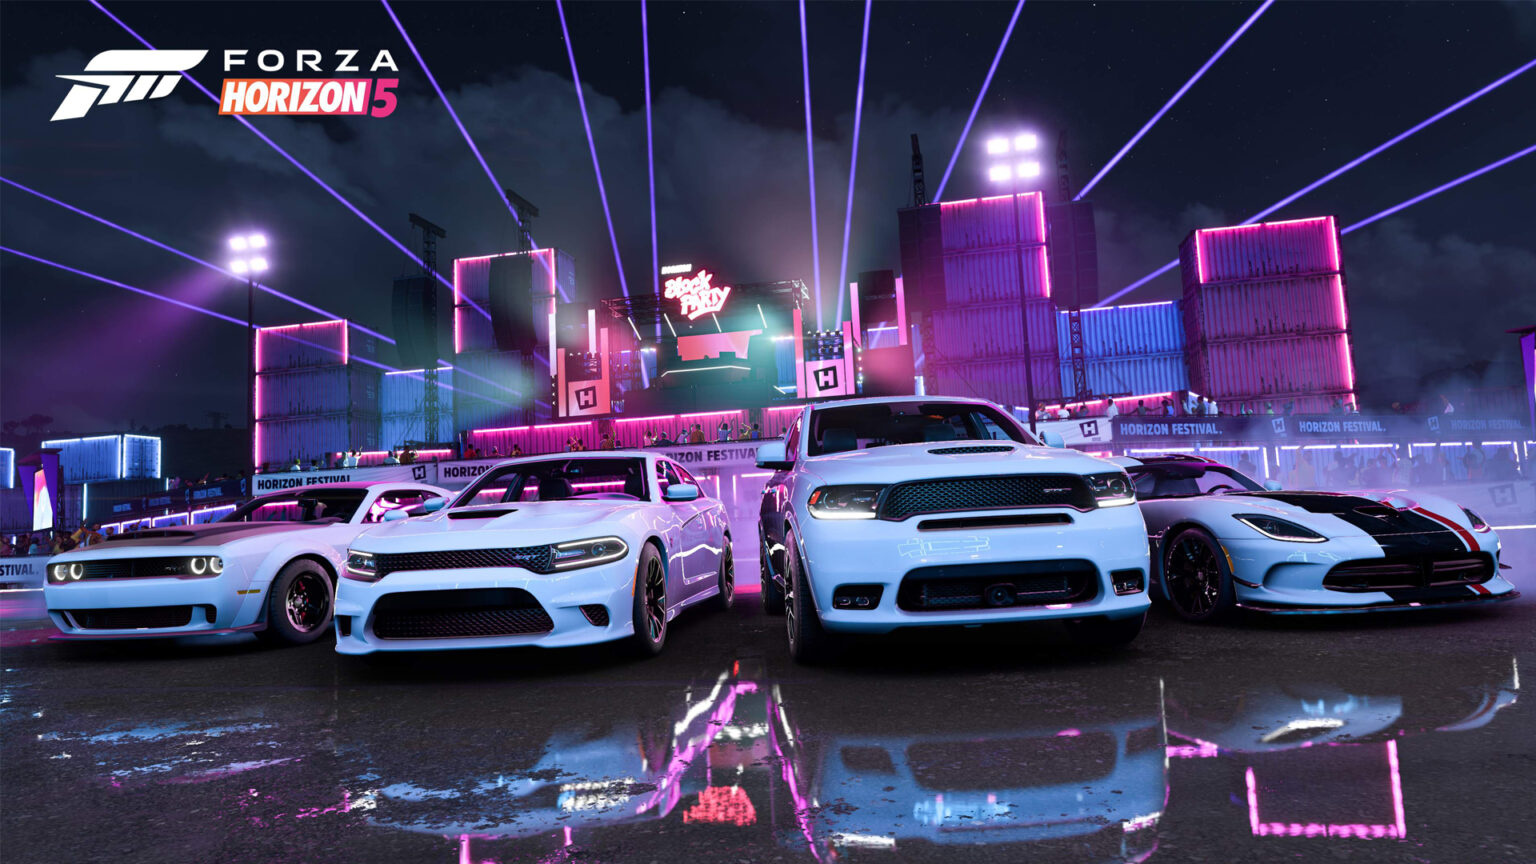 Forza-Horizon-5-hotfix-means-Xbox-Series-X-S-players-can-now-acquire-cars-again-1536x864.jpg